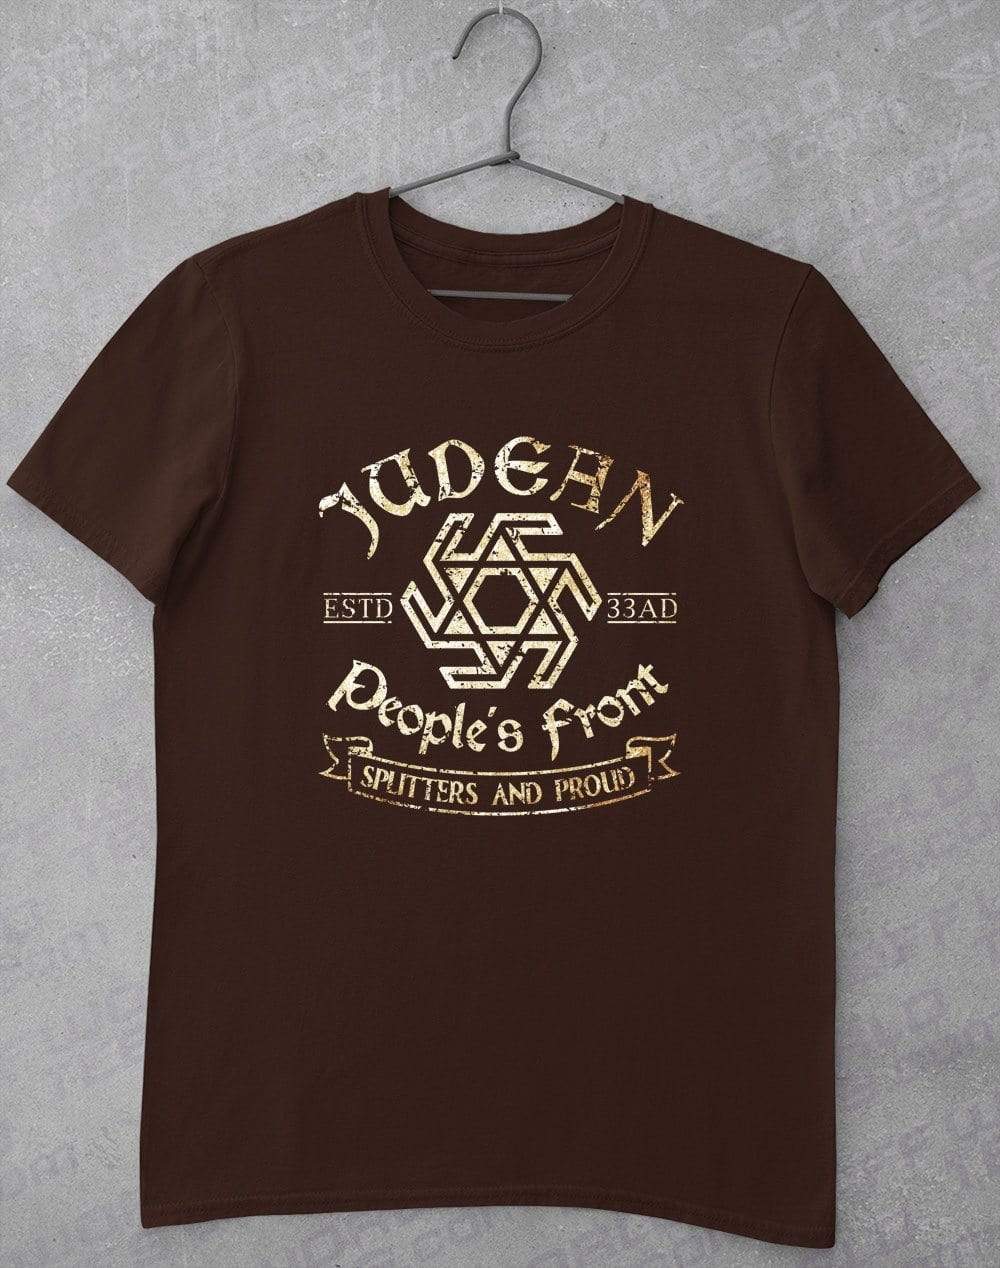 Judean People's Front T Shirt S / Dark Chocolate  - Off World Tees